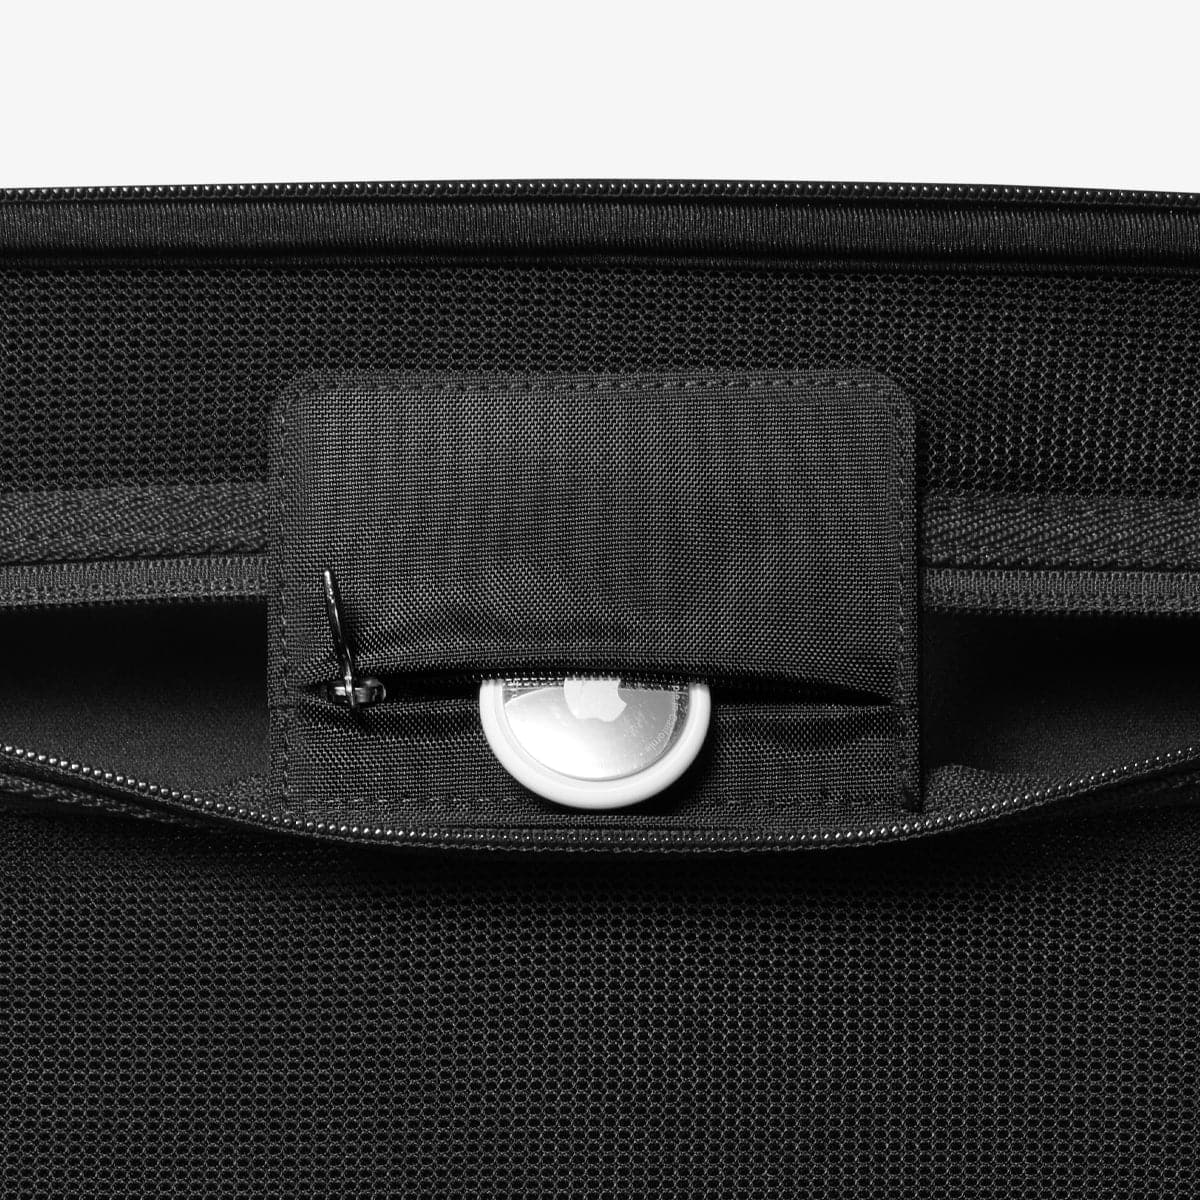 AFA03731 - Steam Deck Case Rugged Armor Pro Sleeve in black showing the airtag slot on the inside of case